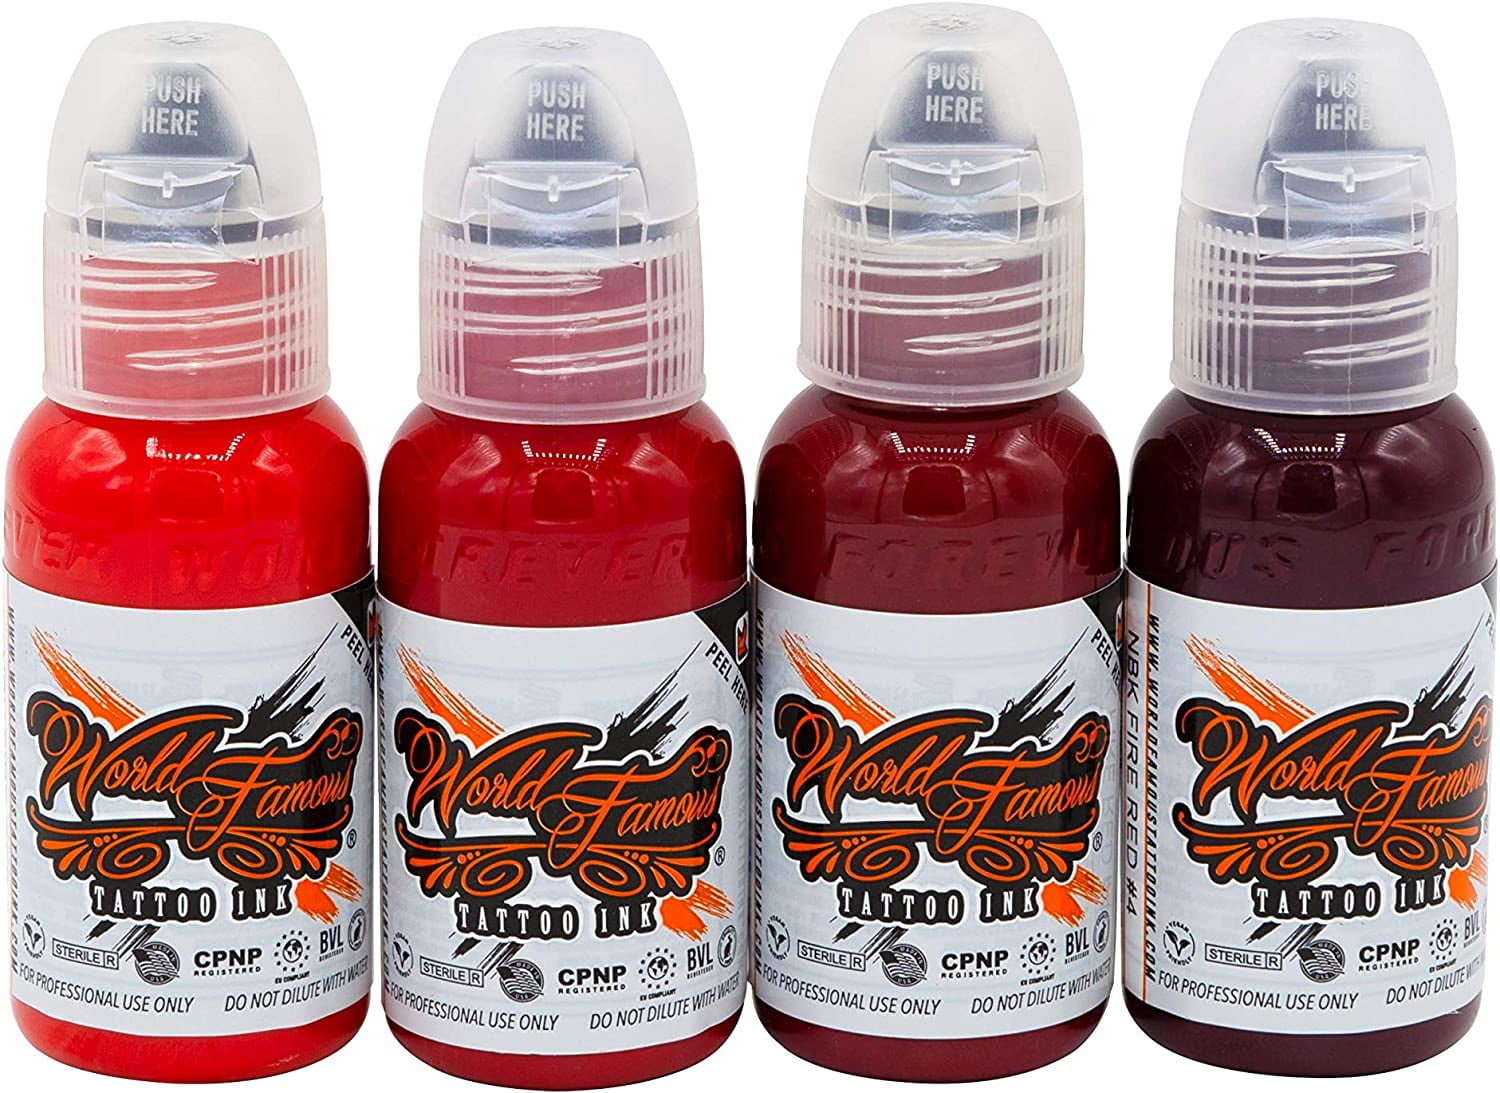 World Famous Red Set Tattoo Ink, Vegan and Professional Ink, Made